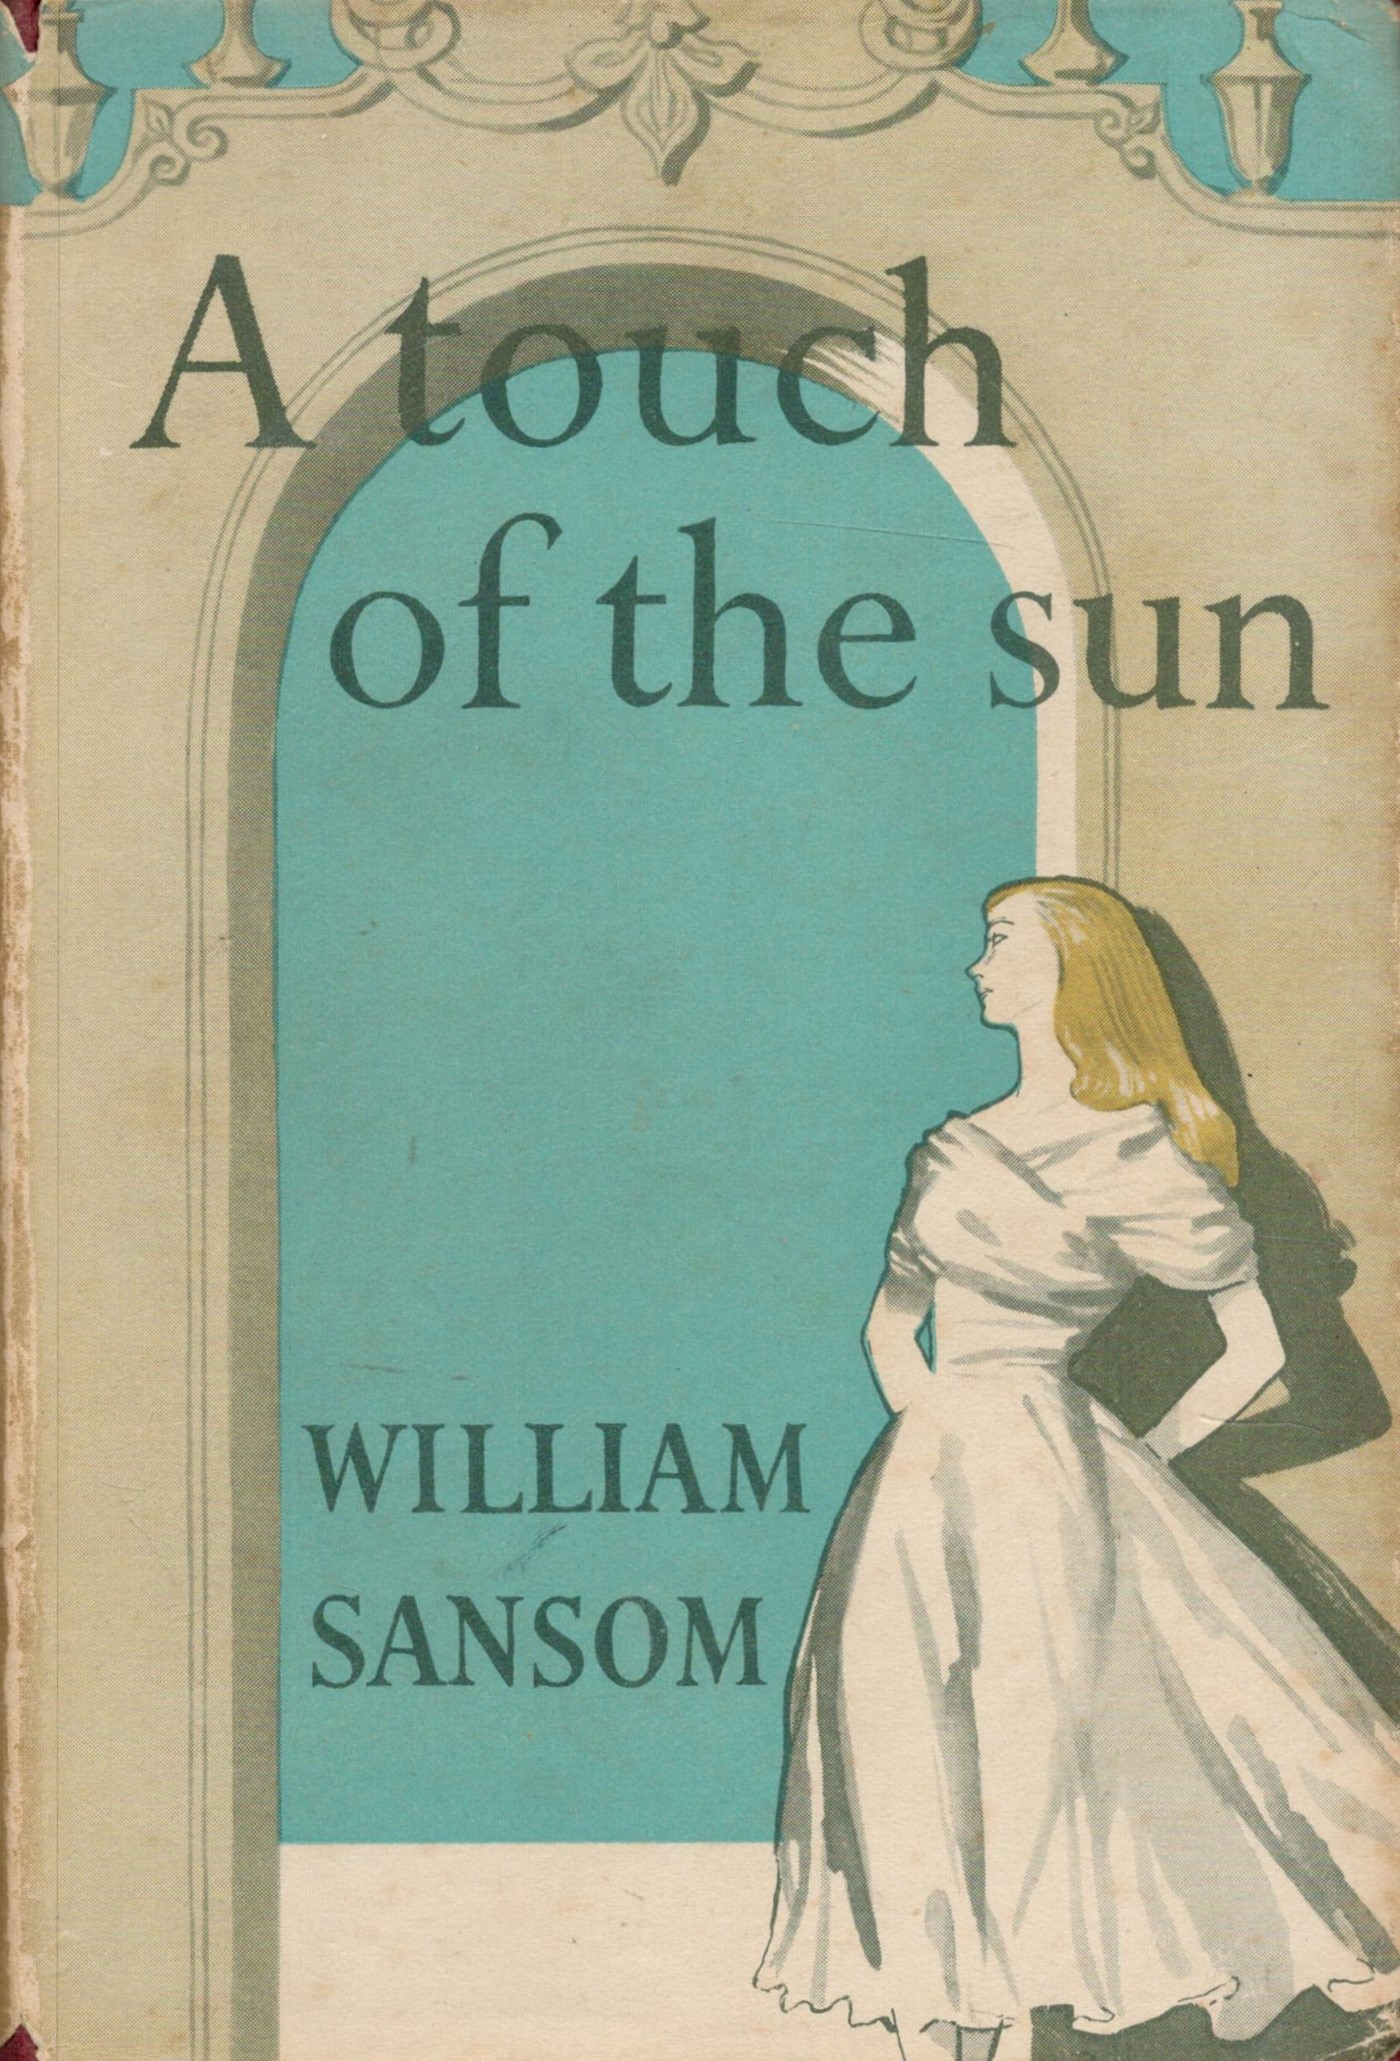 Signed Book William Sansom A Touch of the Sun Hardback Book 1952 First Edition Signed by William